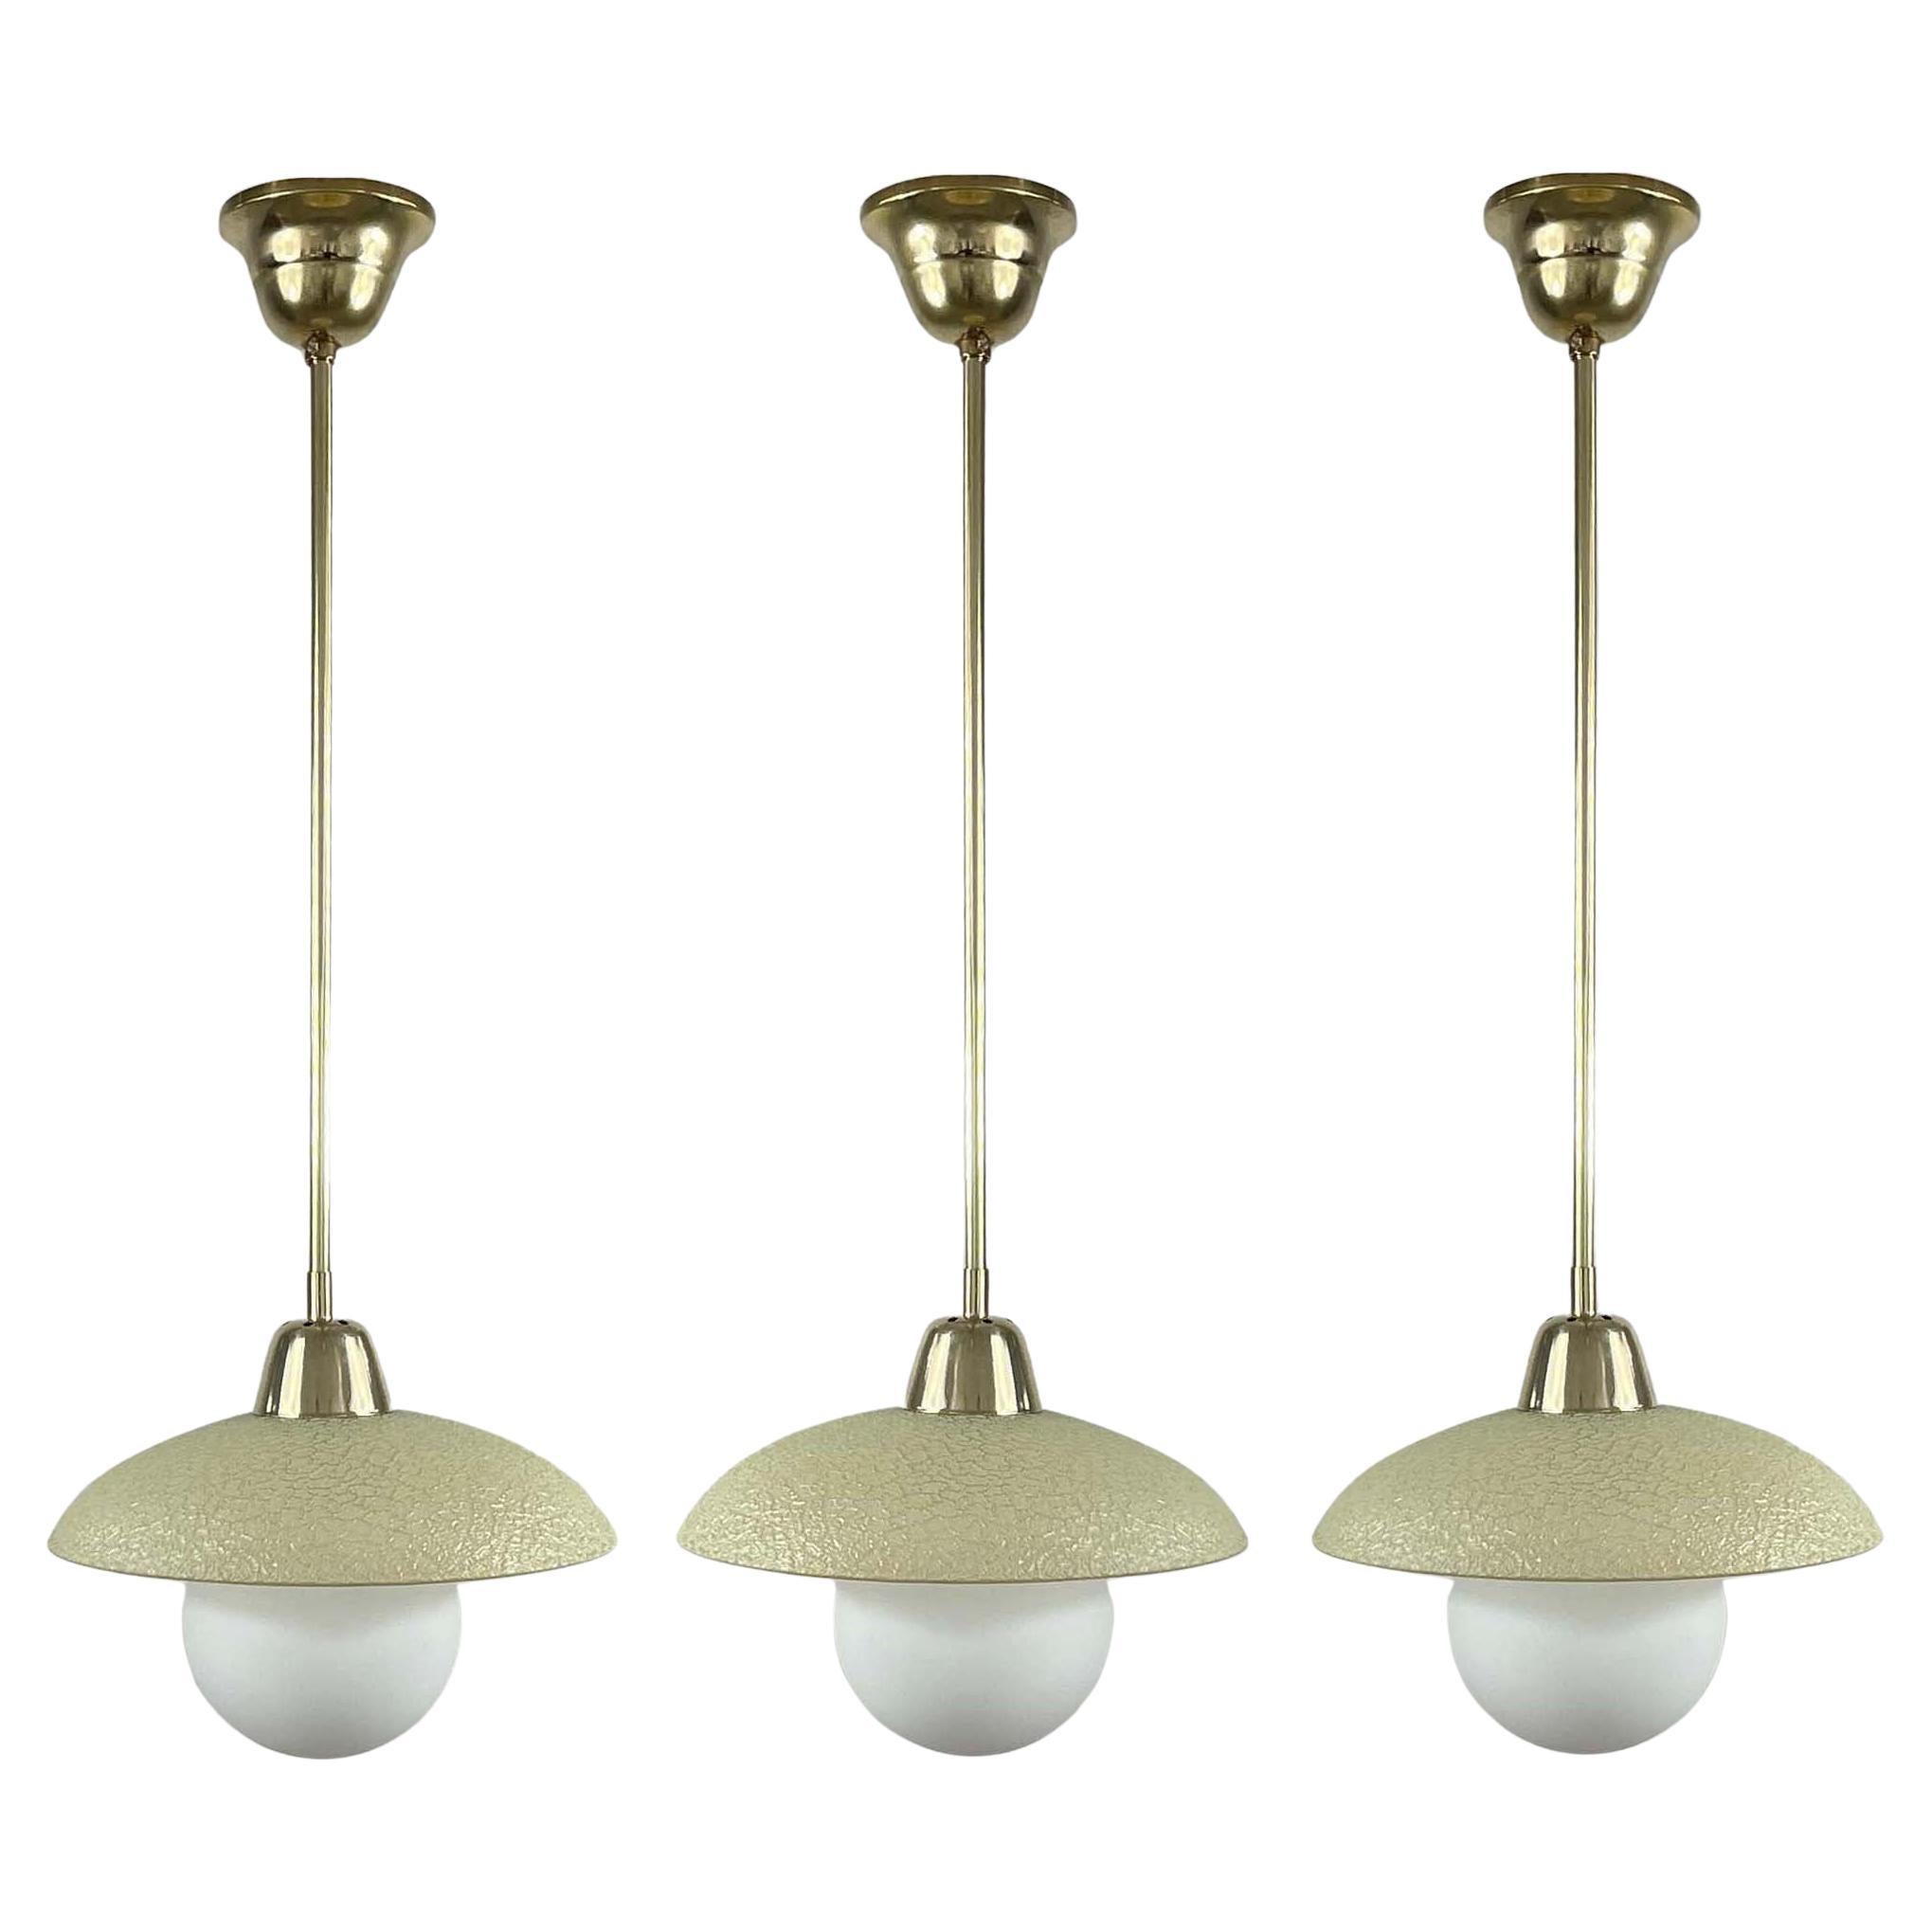 Cream Textured Glass and Brass Pendants, Sweden 1940s to 1950s For Sale